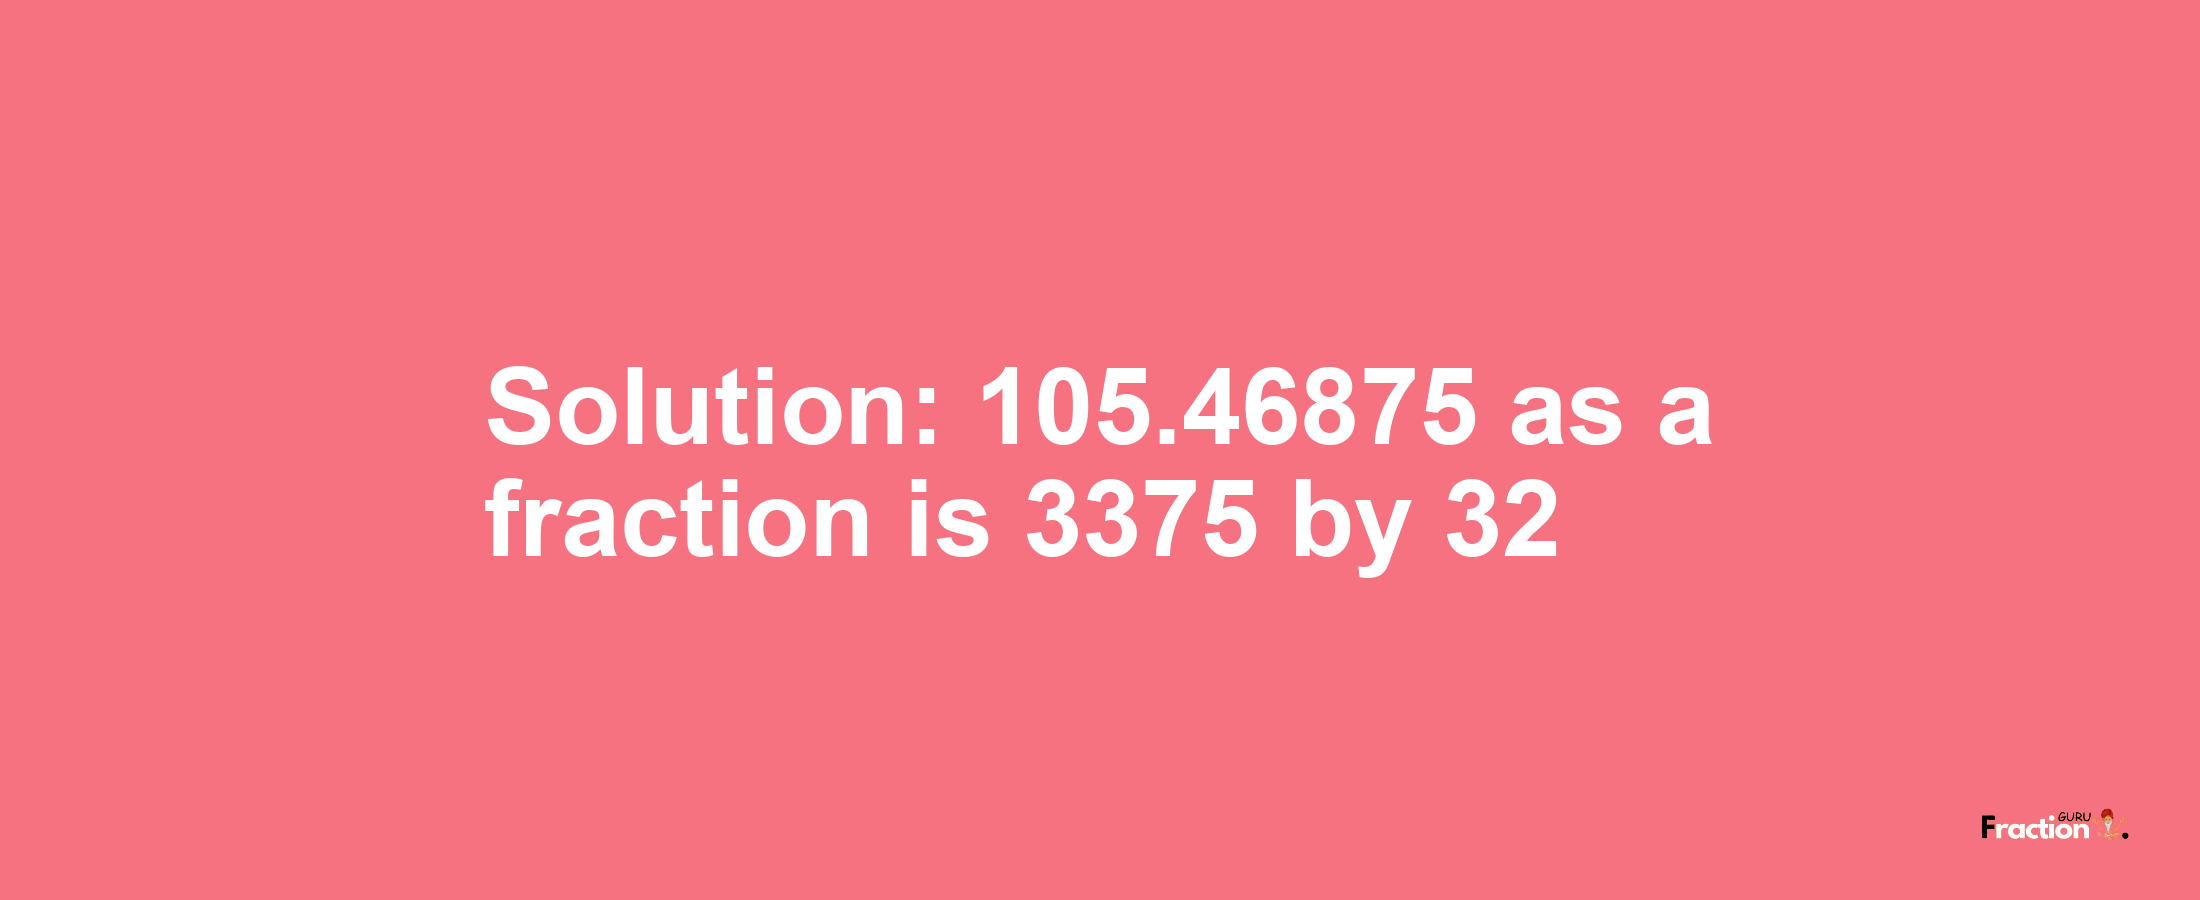 Solution:105.46875 as a fraction is 3375/32